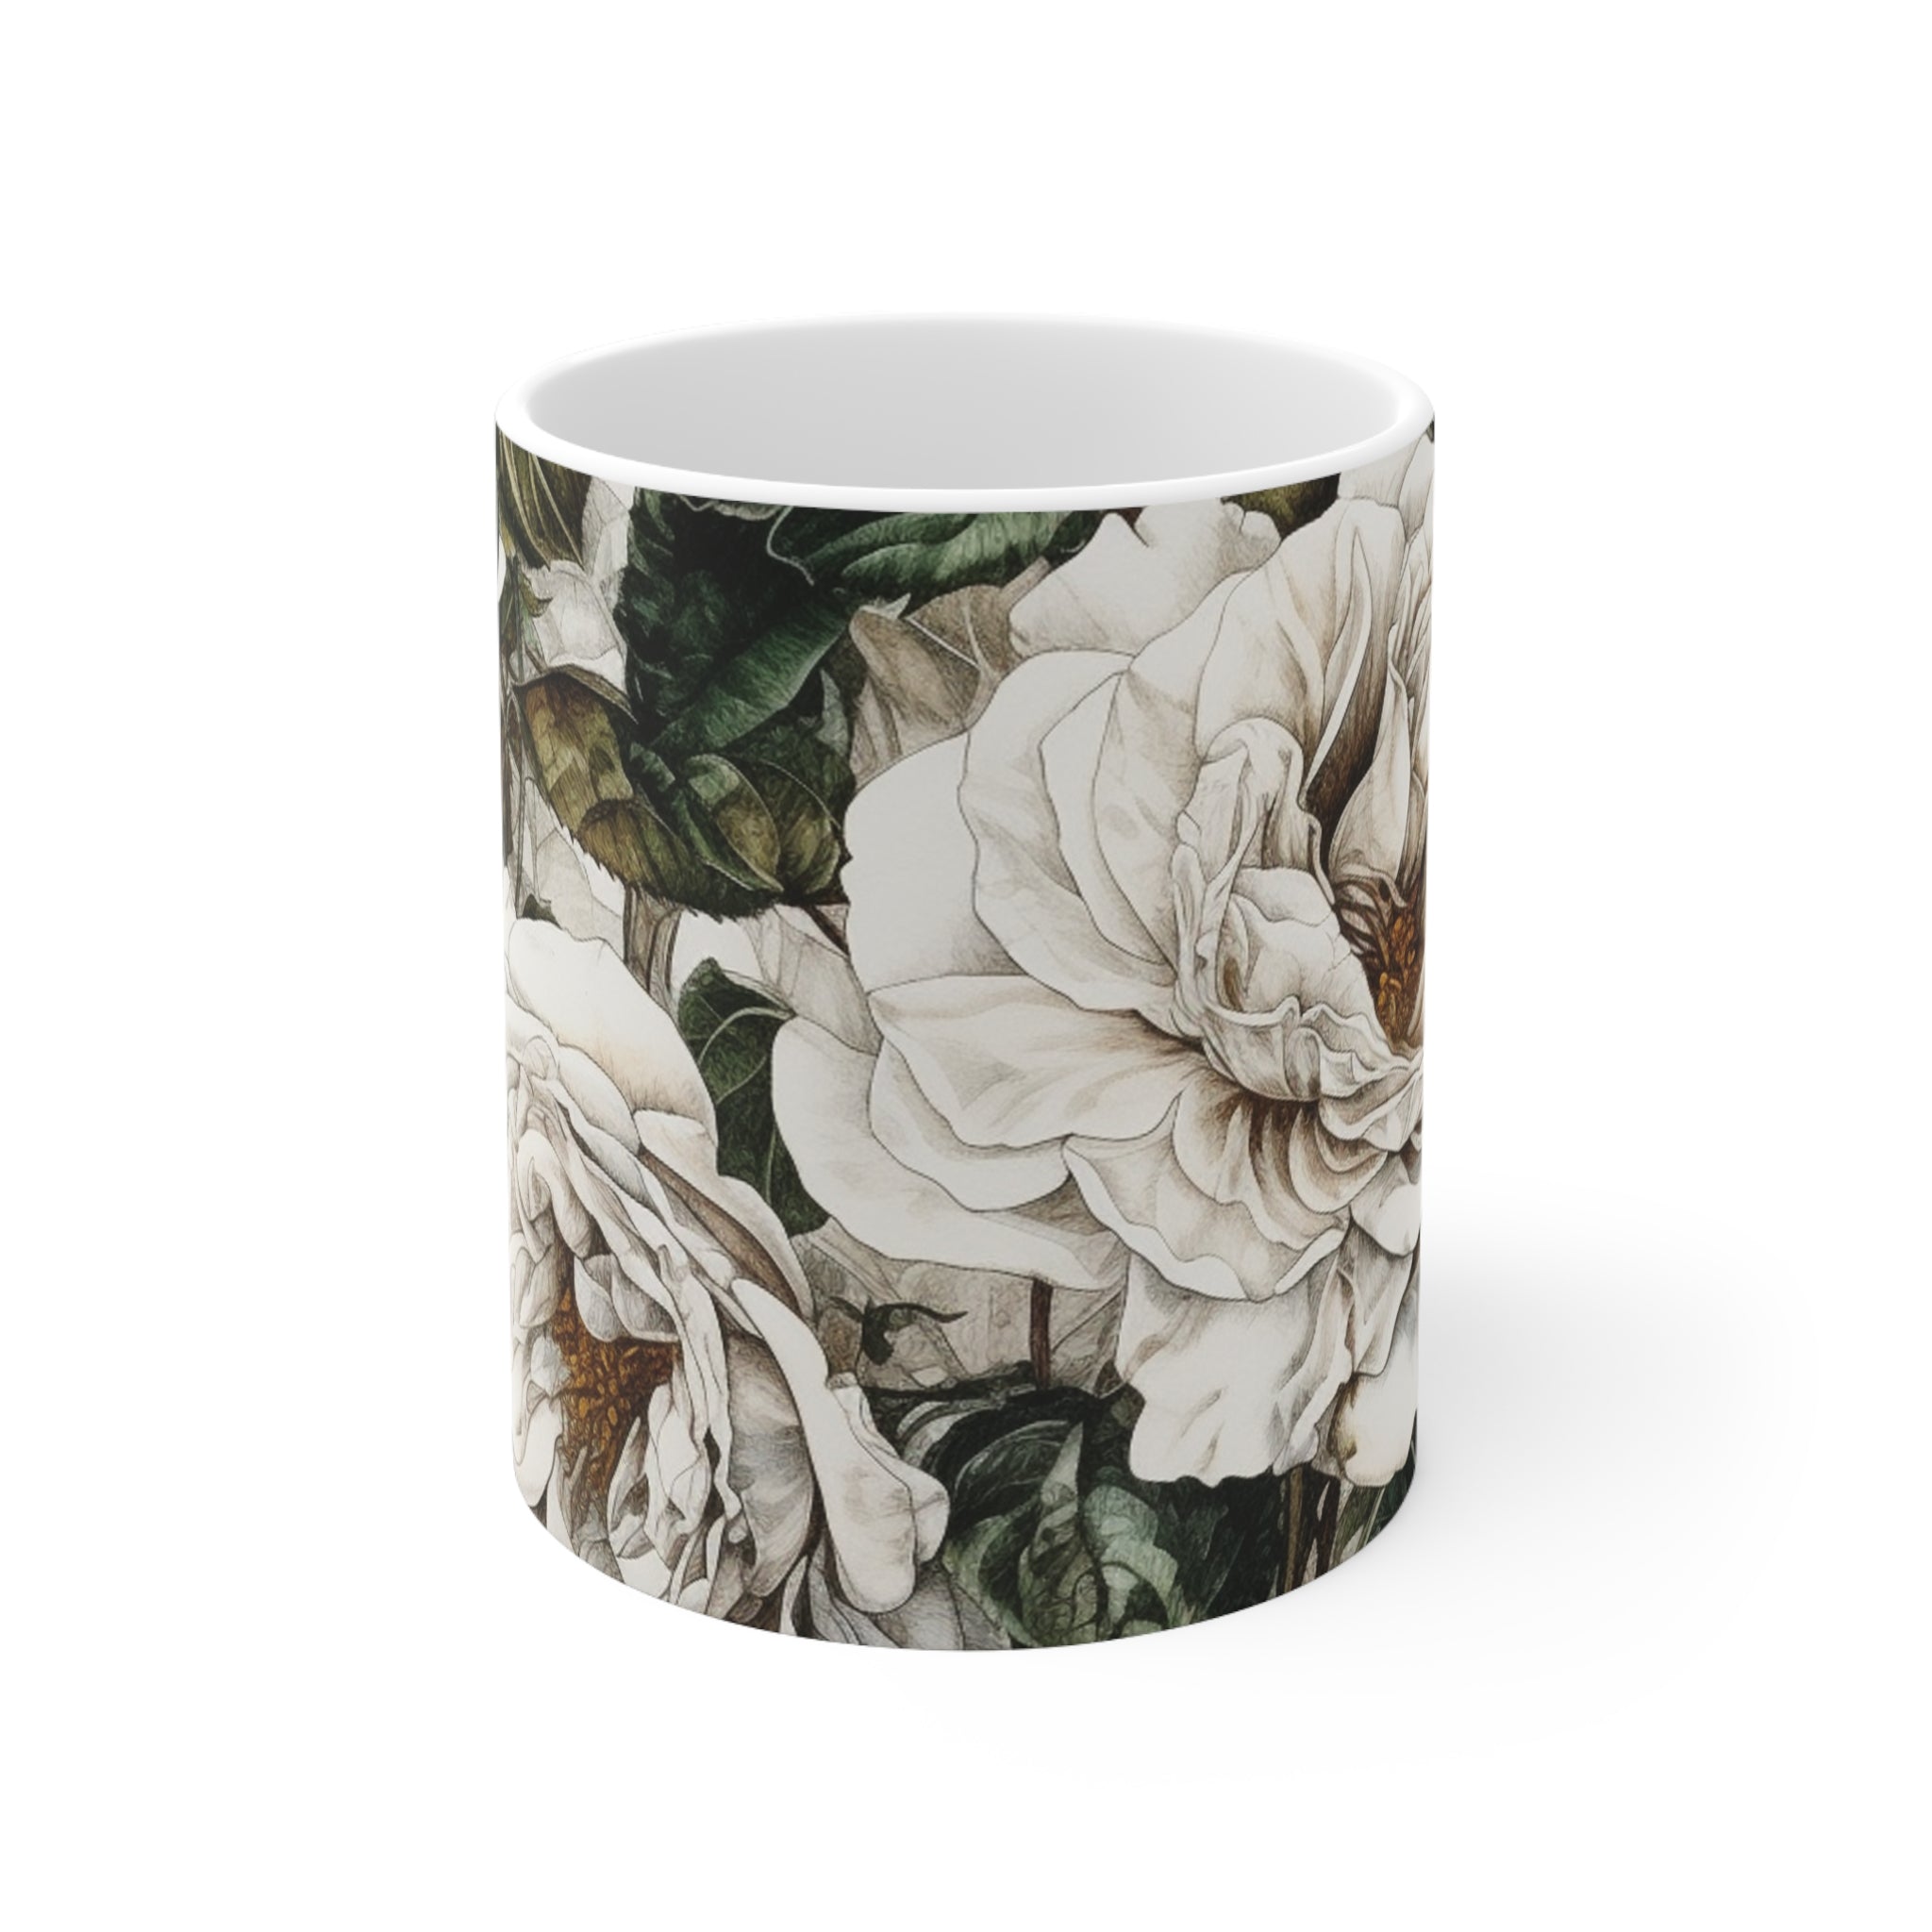 Cute Floral Coffee Mug Coffee Cup With Beautiful Painted White Rose Bush for Hot Starbucks Coffee or Yeti Drinks